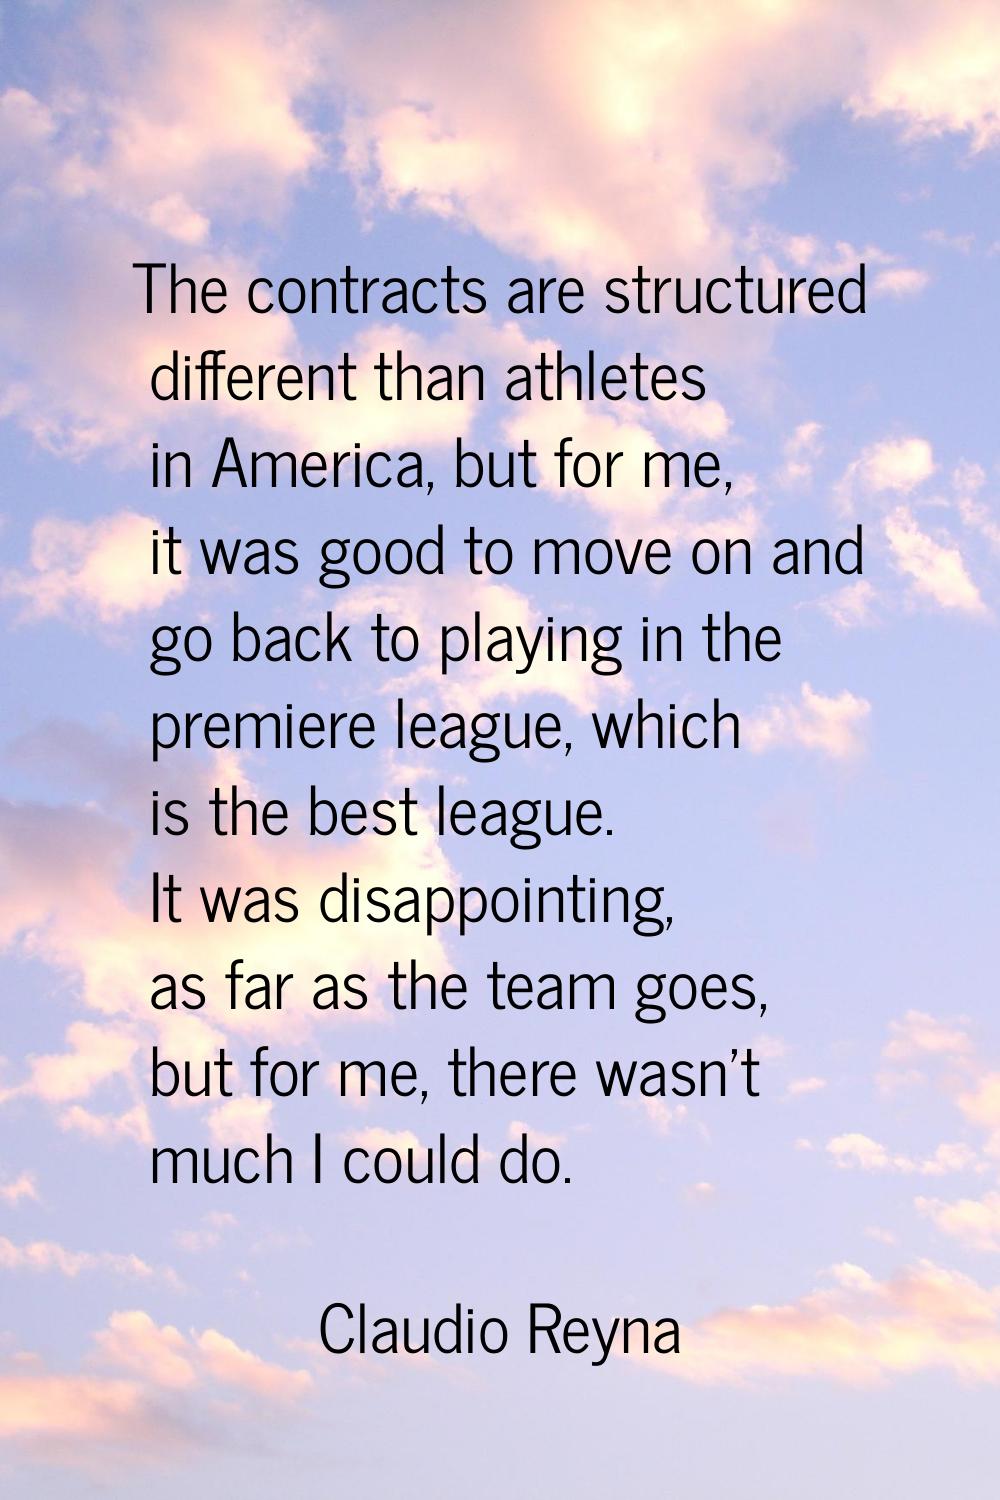 The contracts are structured different than athletes in America, but for me, it was good to move on